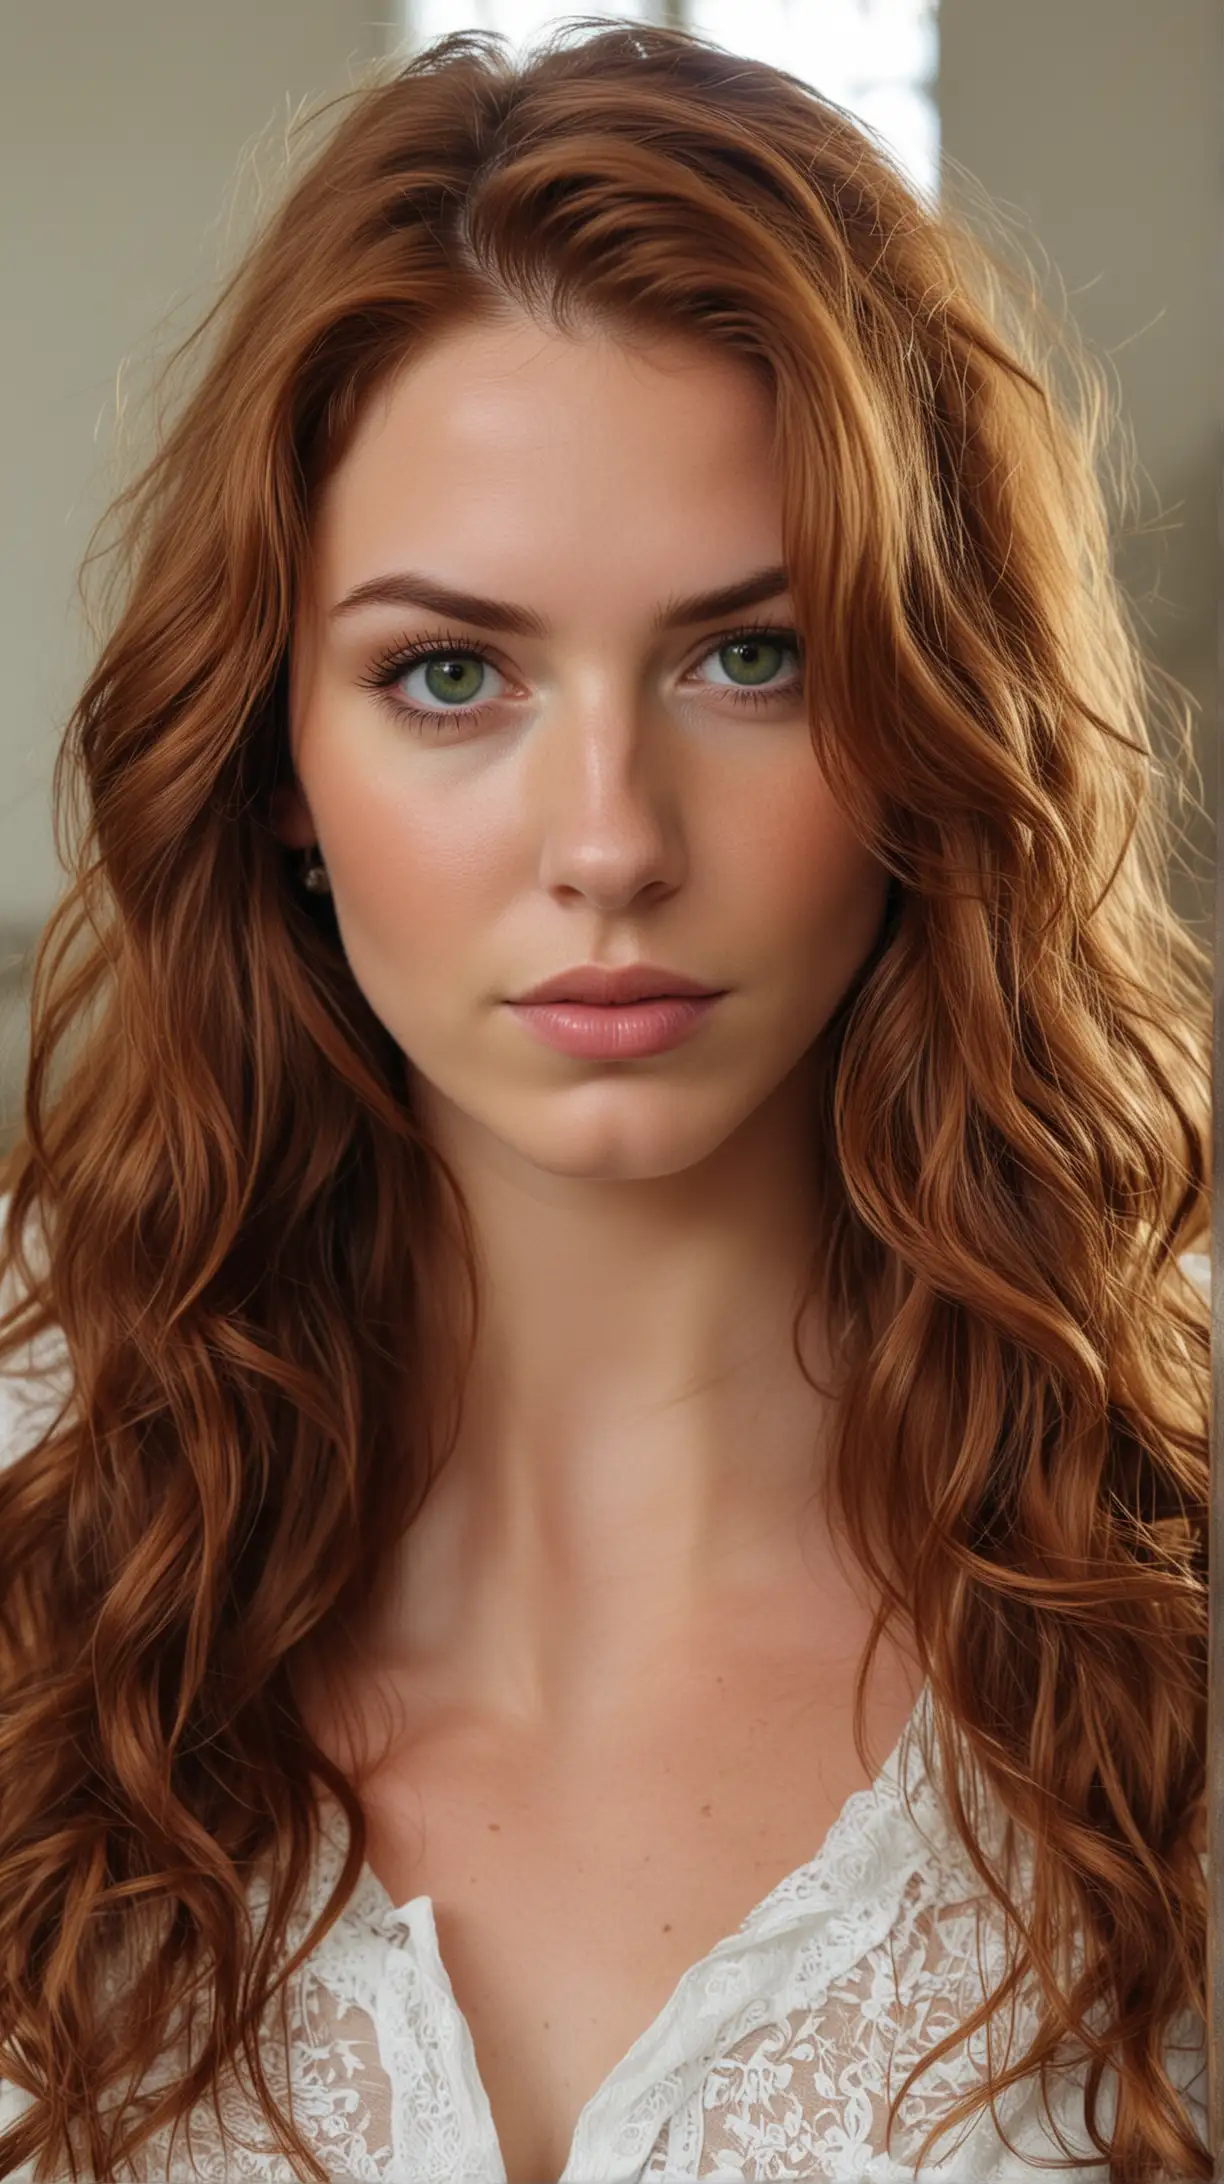 25-year-old girl Julie Roberts with long, wavy auburn hair, and intense green eyes, standing in a church